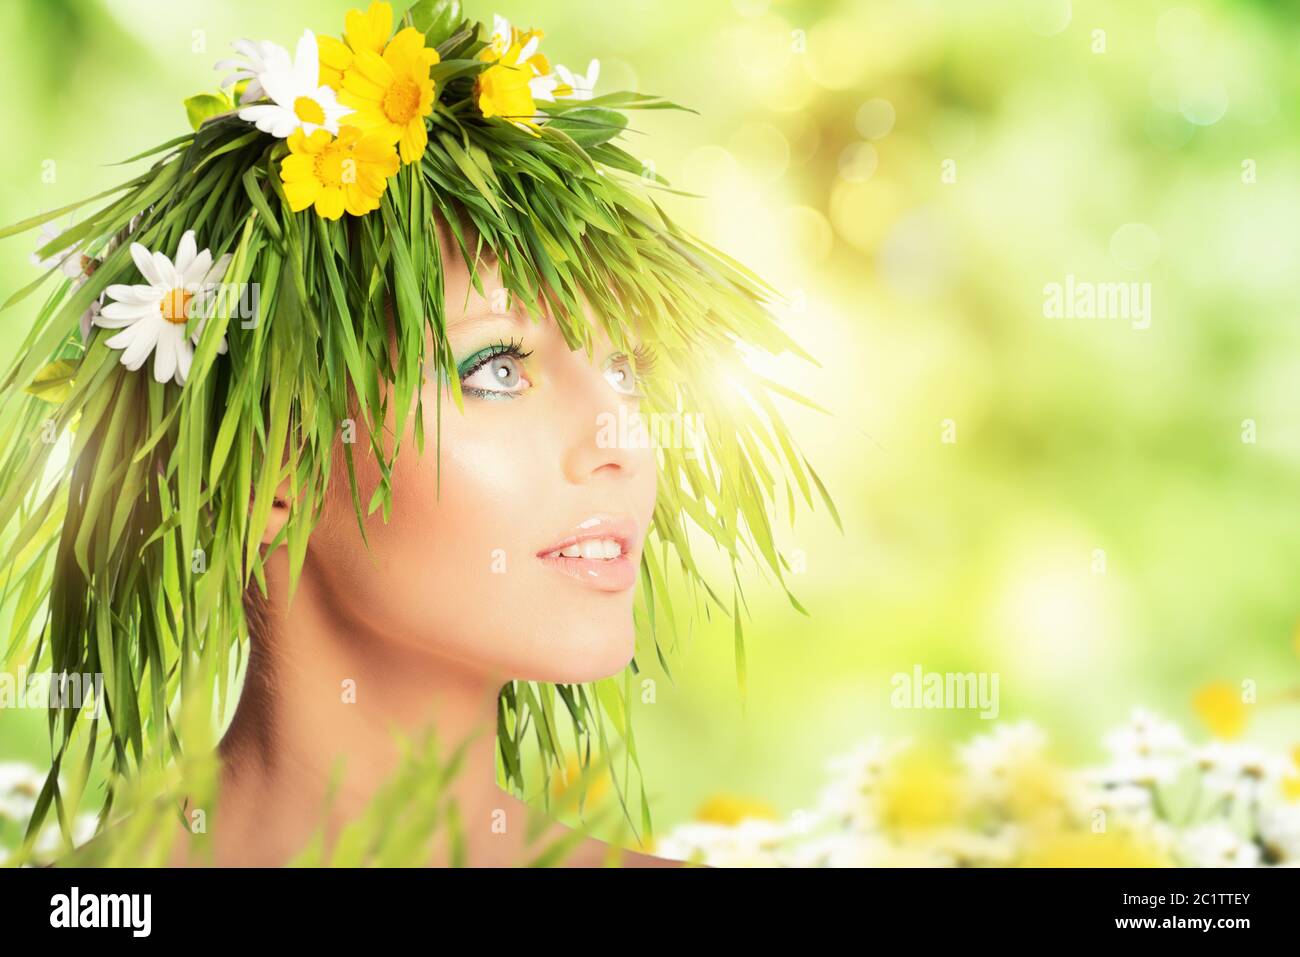 Mother nature beauty concept with girl hair made of flowers and grass. Stock Photo